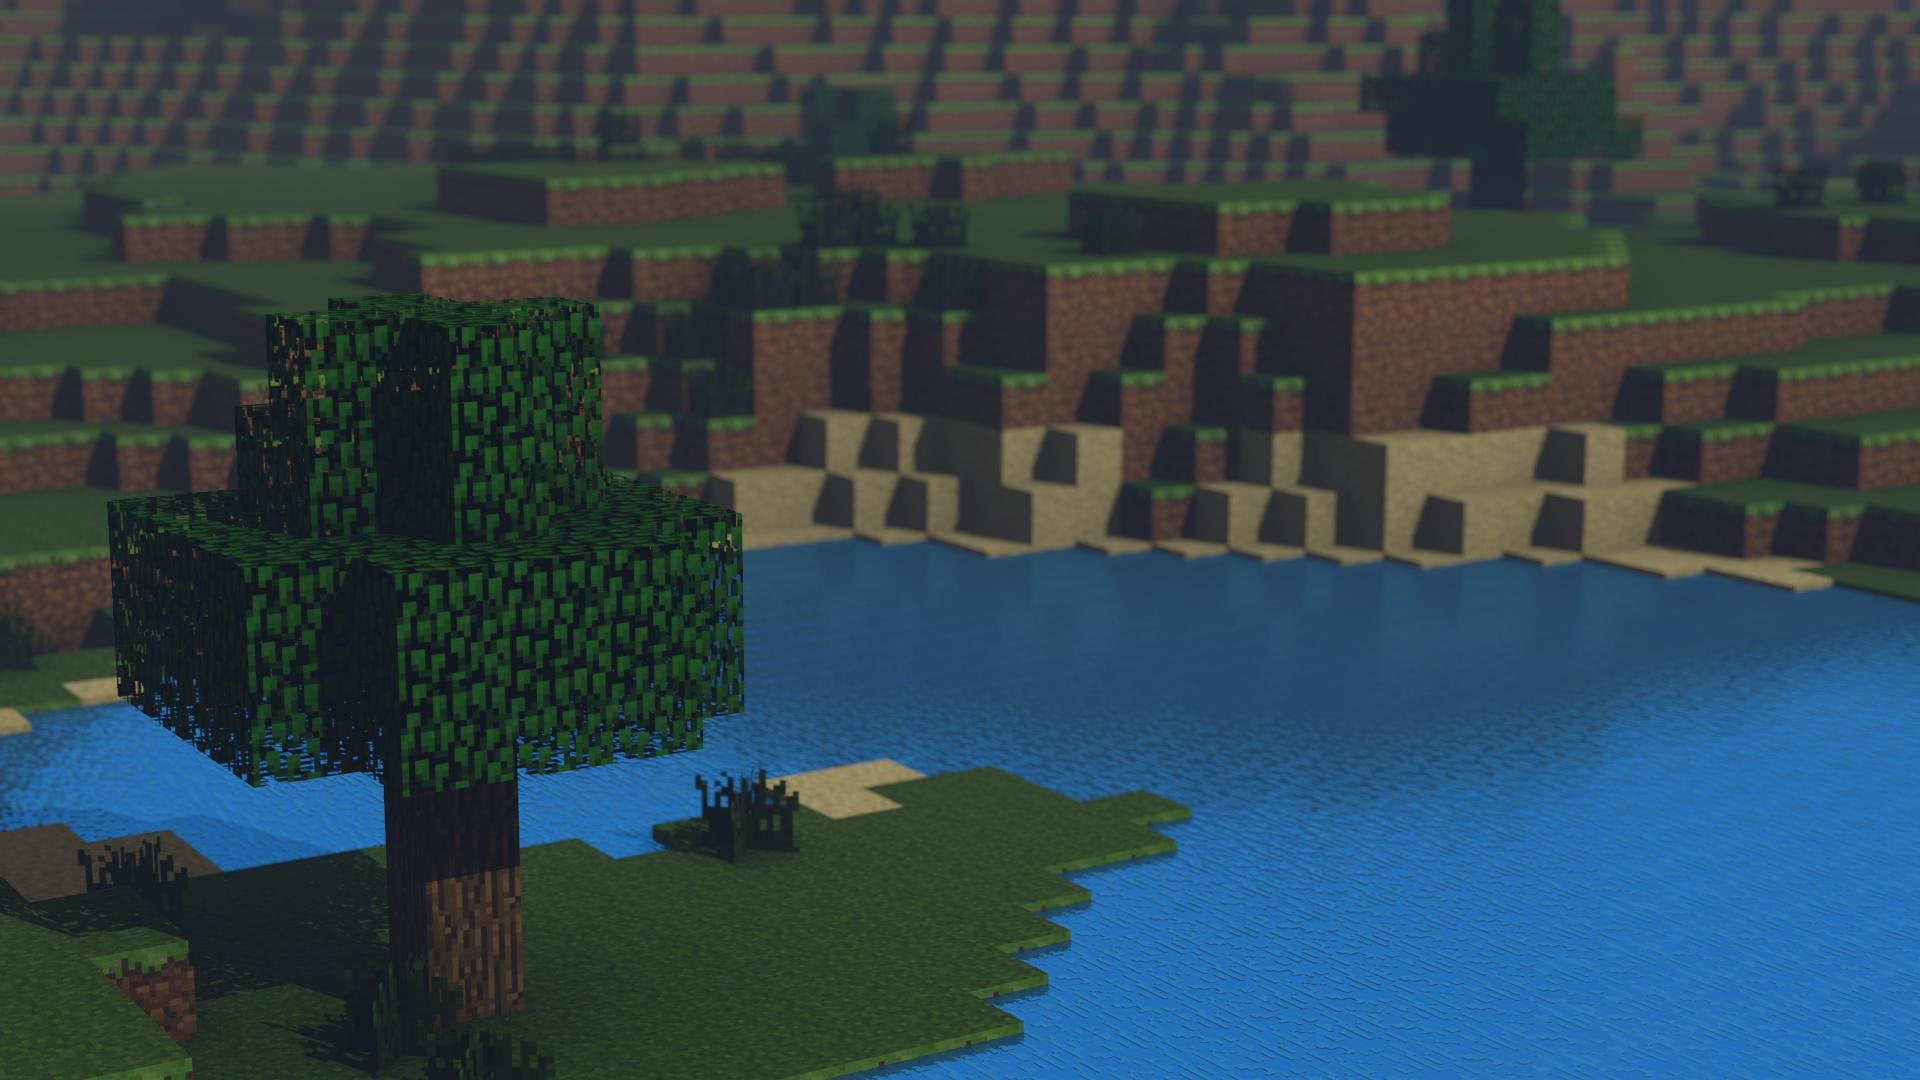 Minecraft Tree By A Lake (Render Done By Me) [1920x1080] (x Post From R Wallpaper And R Minecraft)